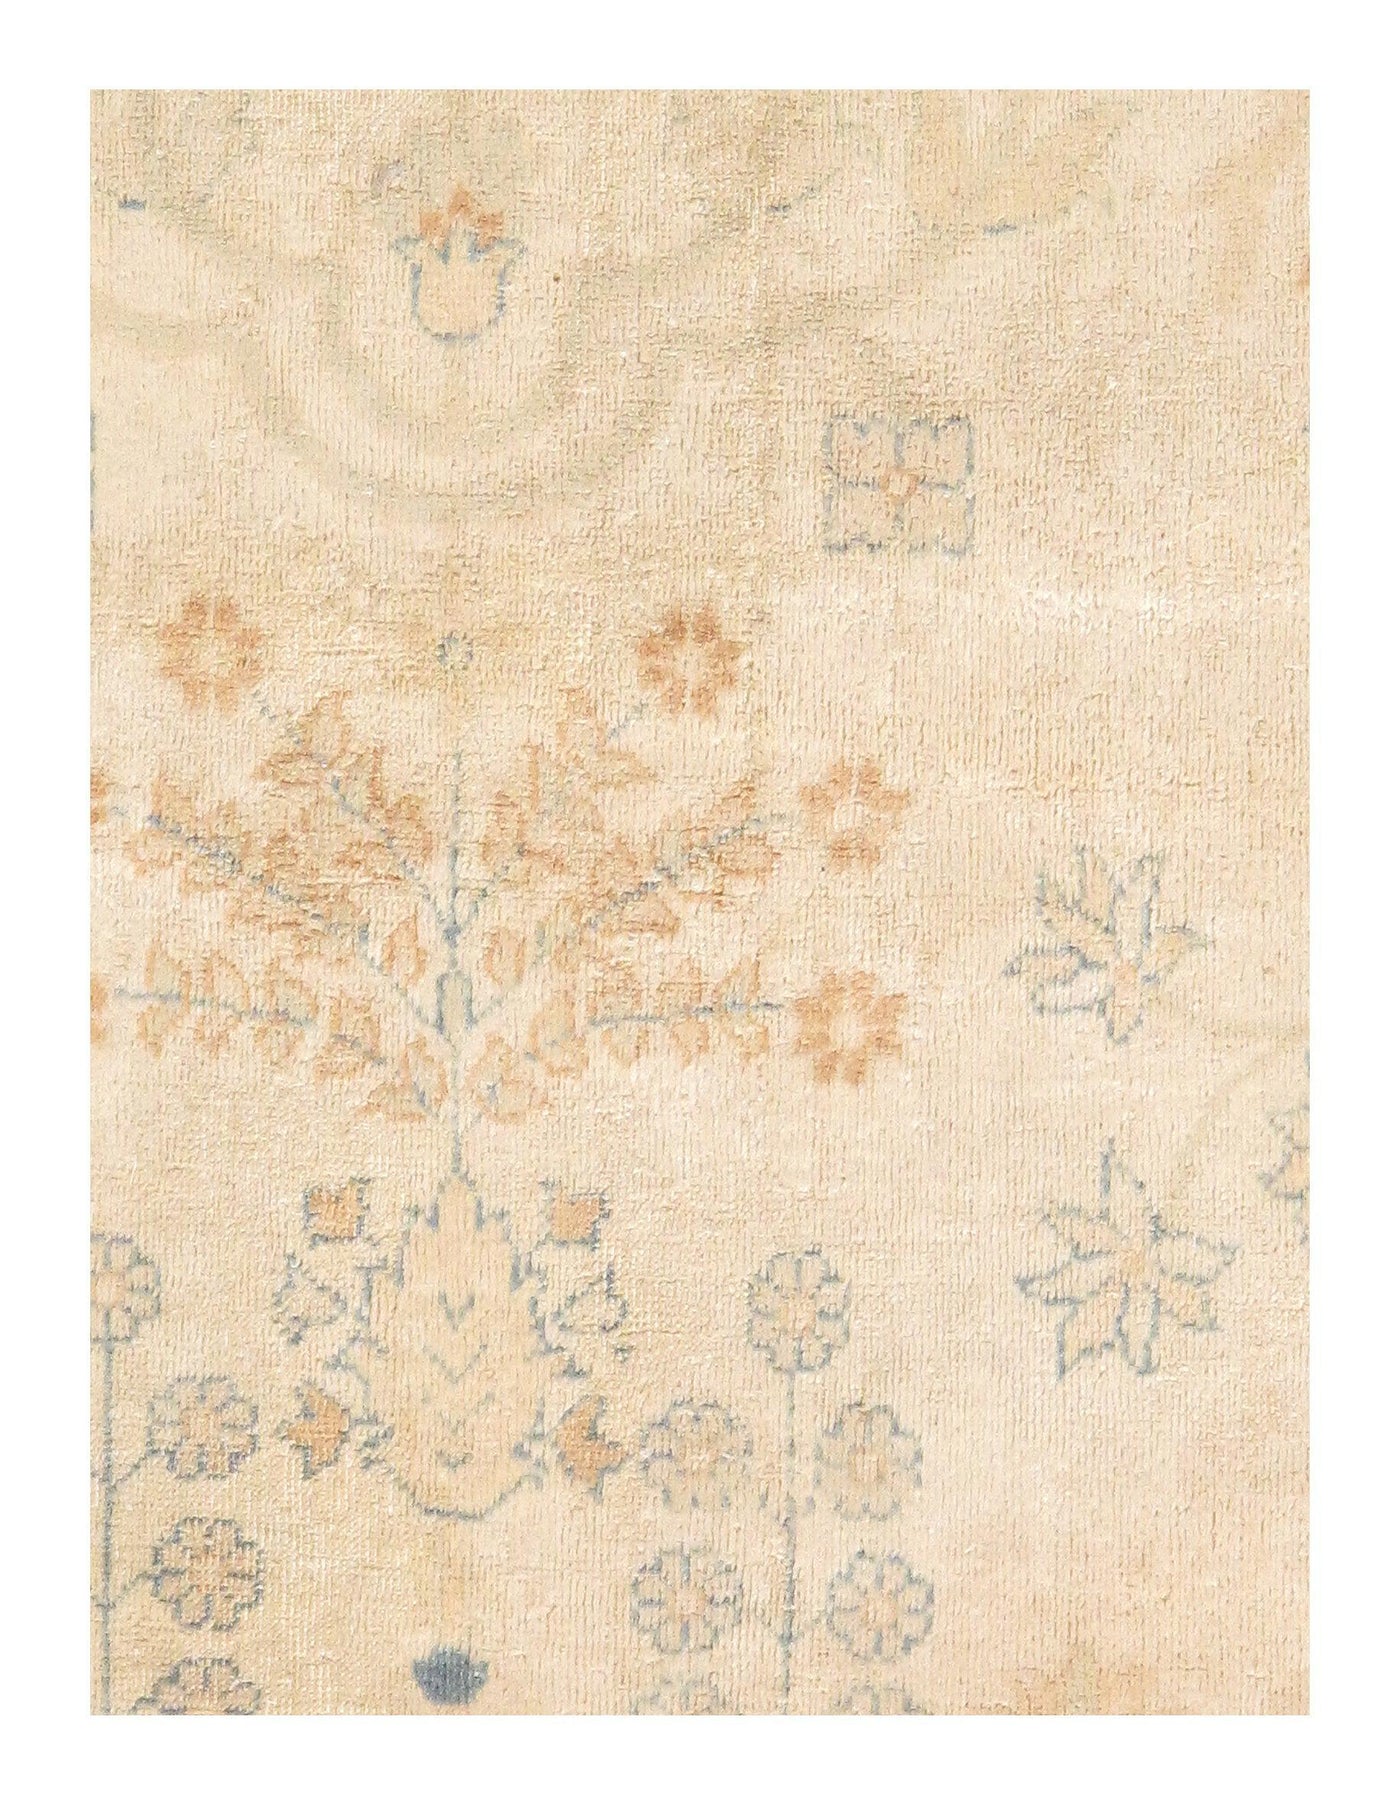 Canvello Vintage Early 20th Beige Indo Lar Rug - 12' X 20'7''